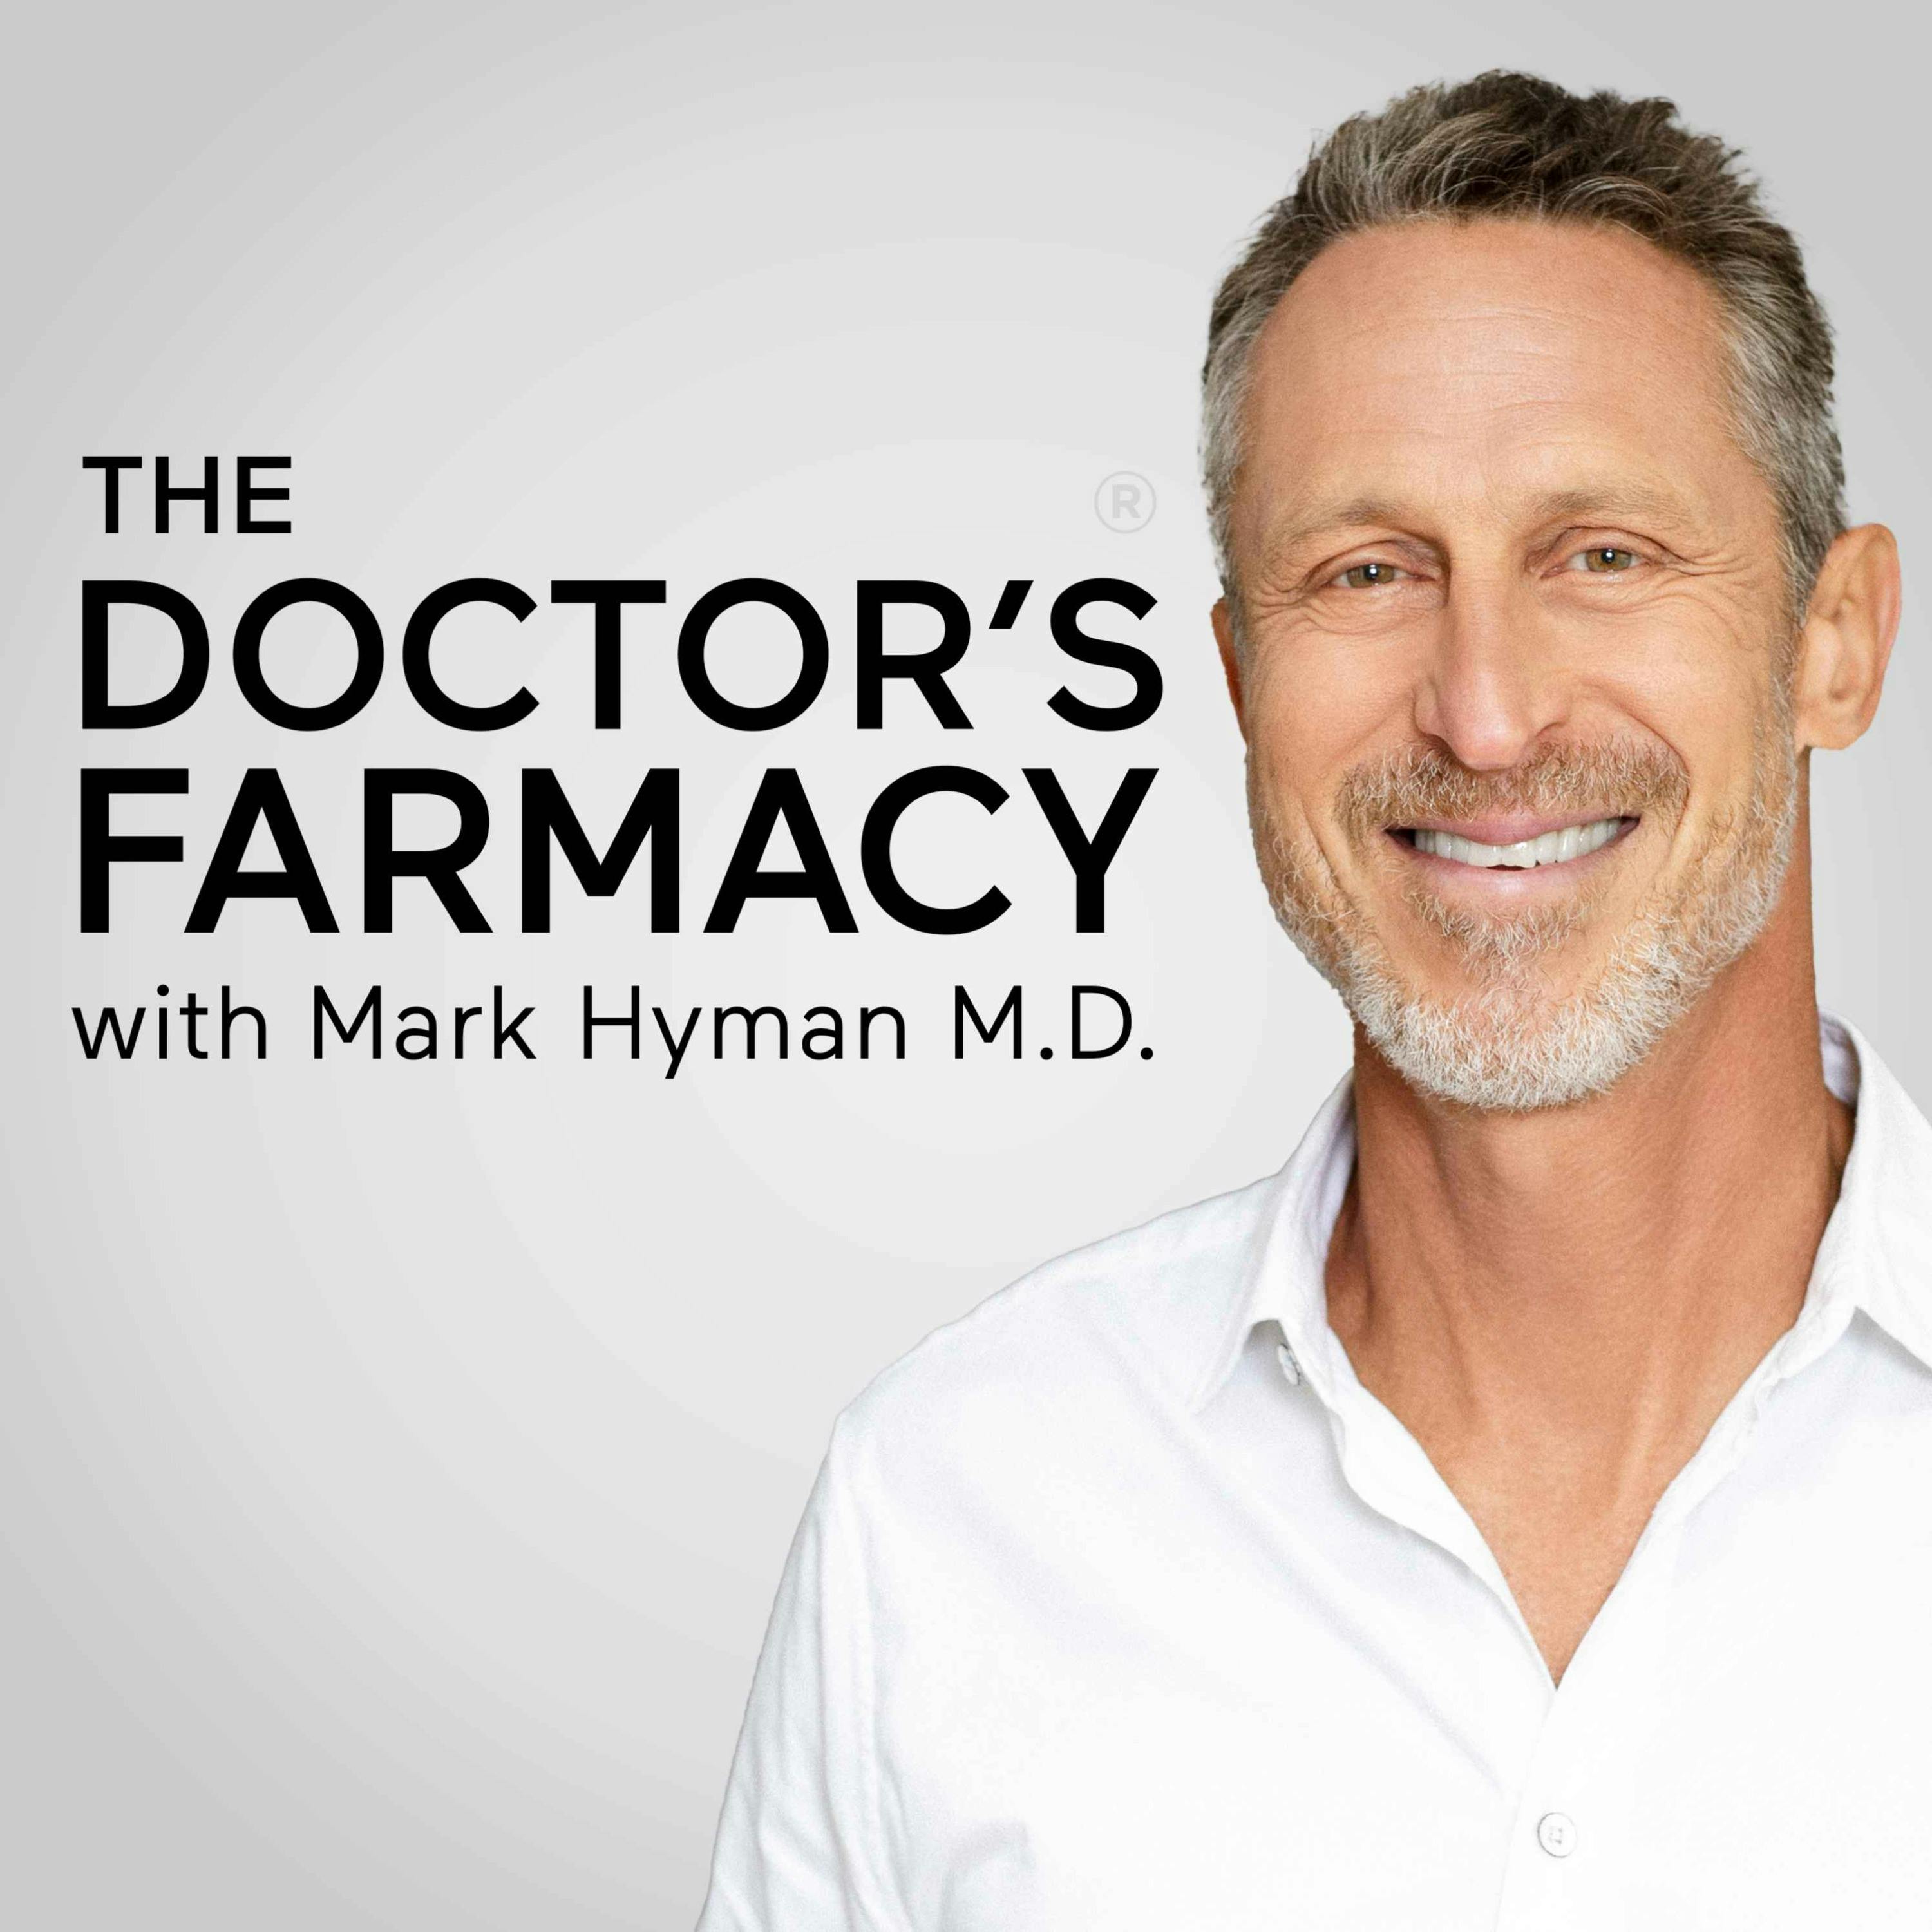 Exclusive Dr. Hyman+ Ask Mark Anything: My Go-To Breakfast, Alcohol Consumption, And More